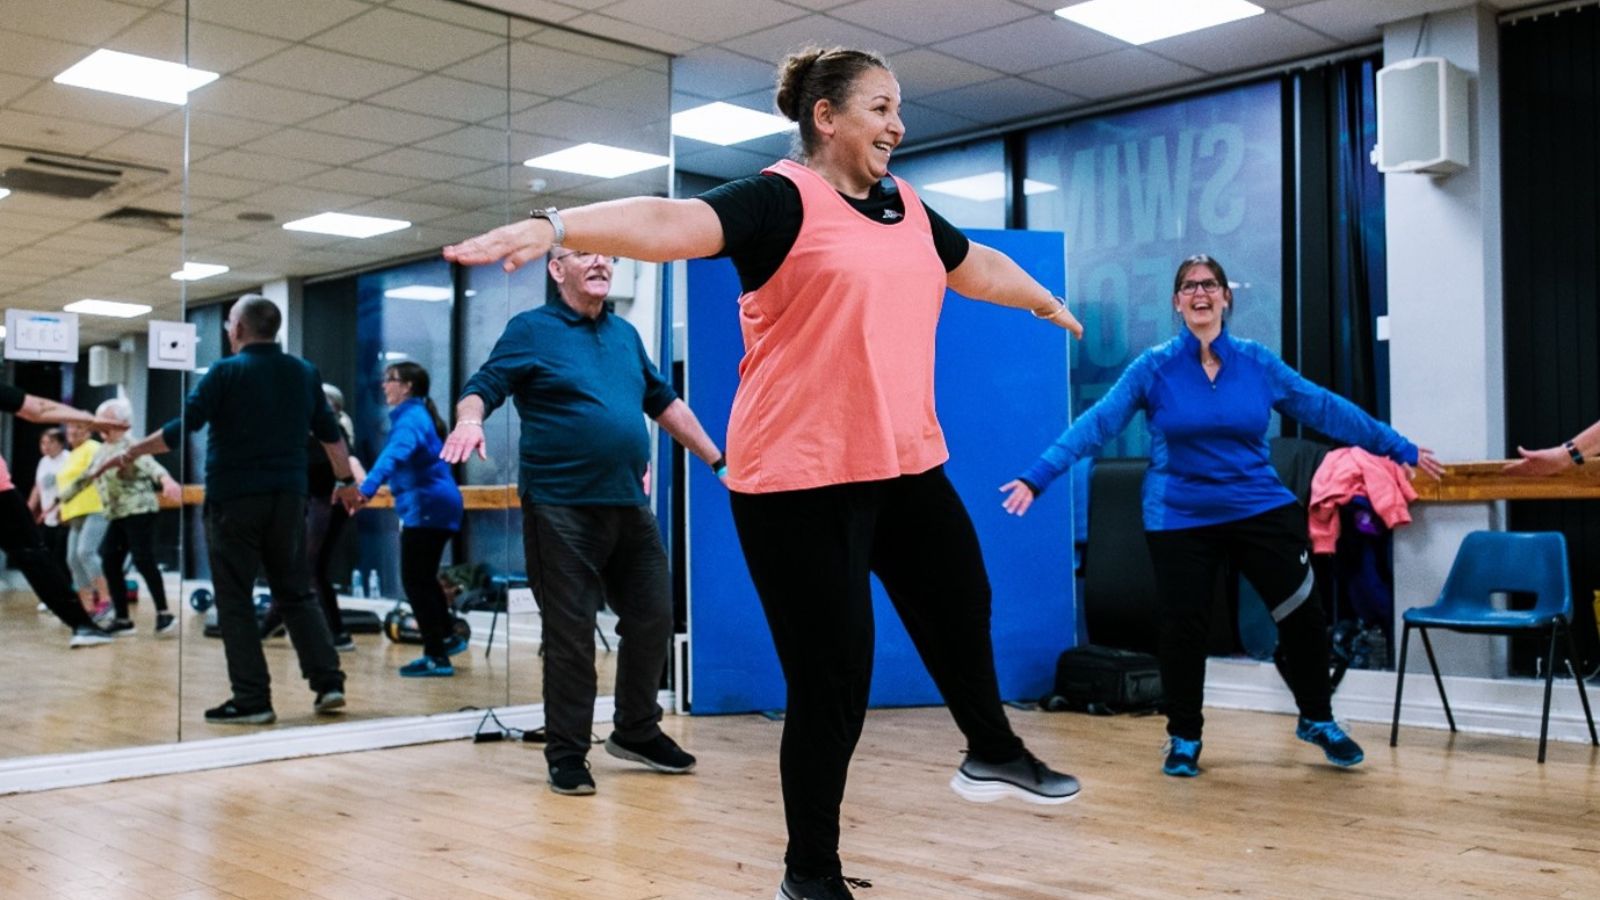 group taking part in a fitness class